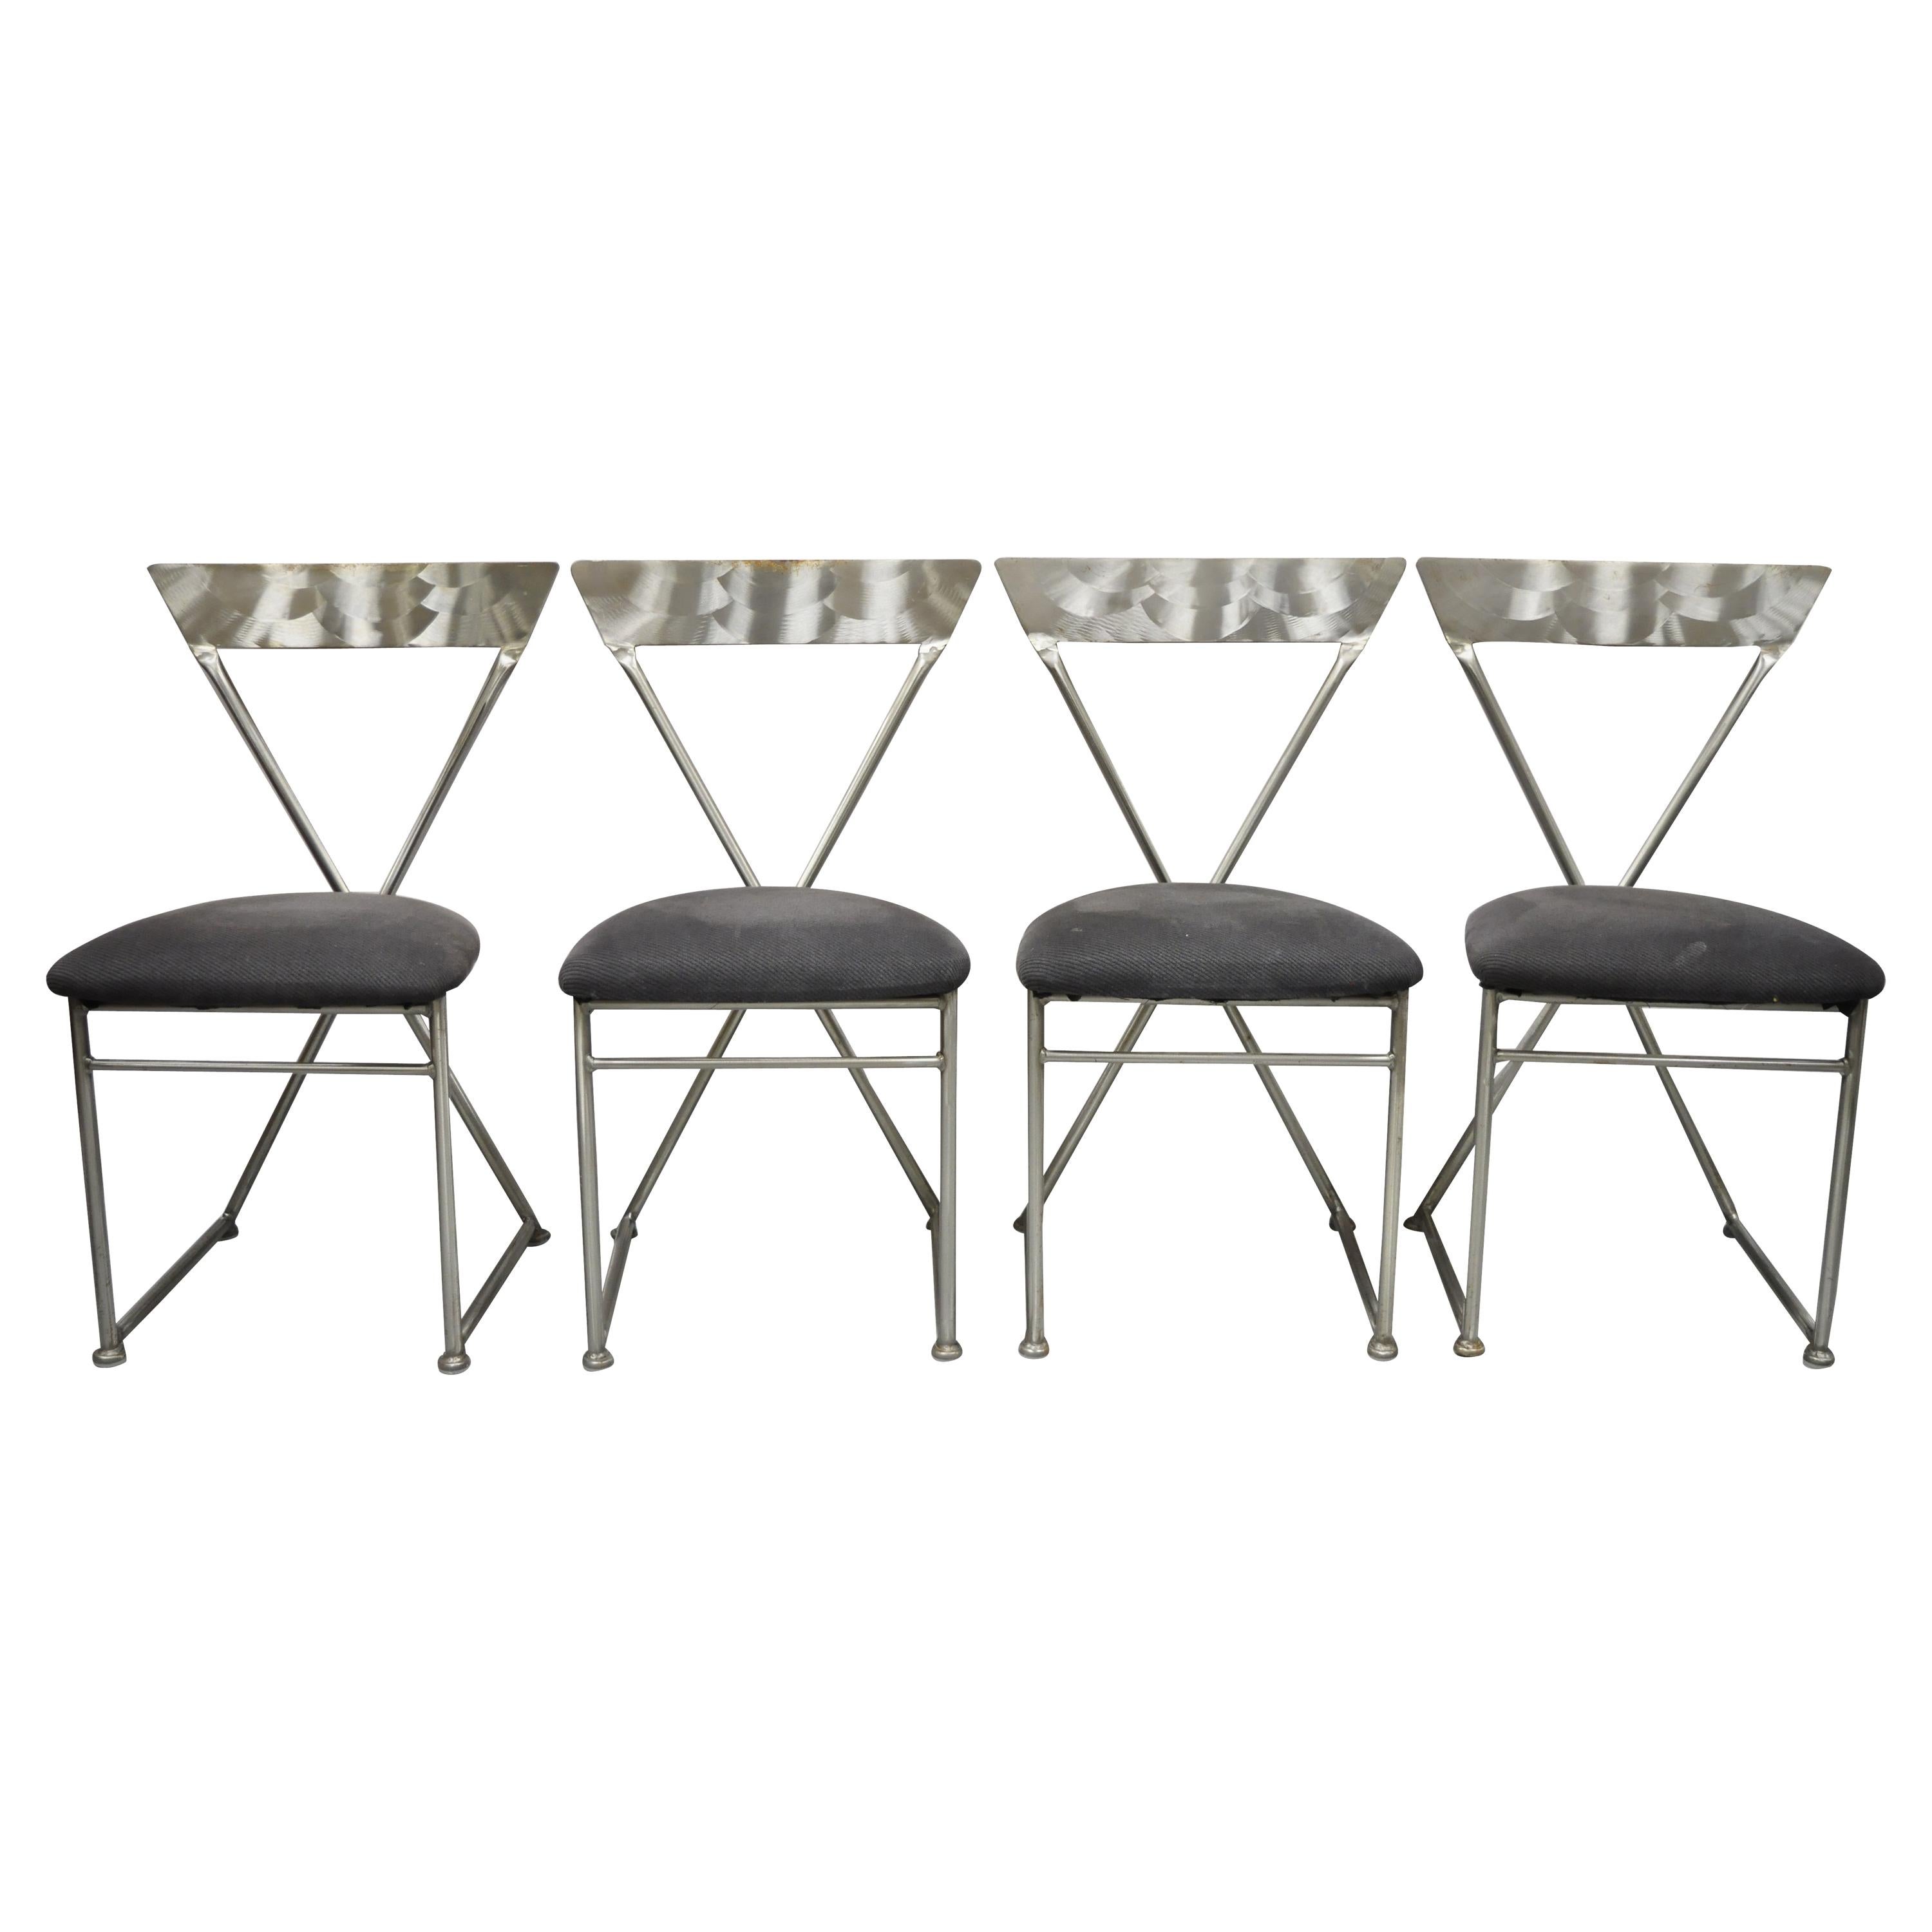 Shaver Howard Italian Modernist Brushed Steel Metal Dining Chairs, Set of 4 For Sale